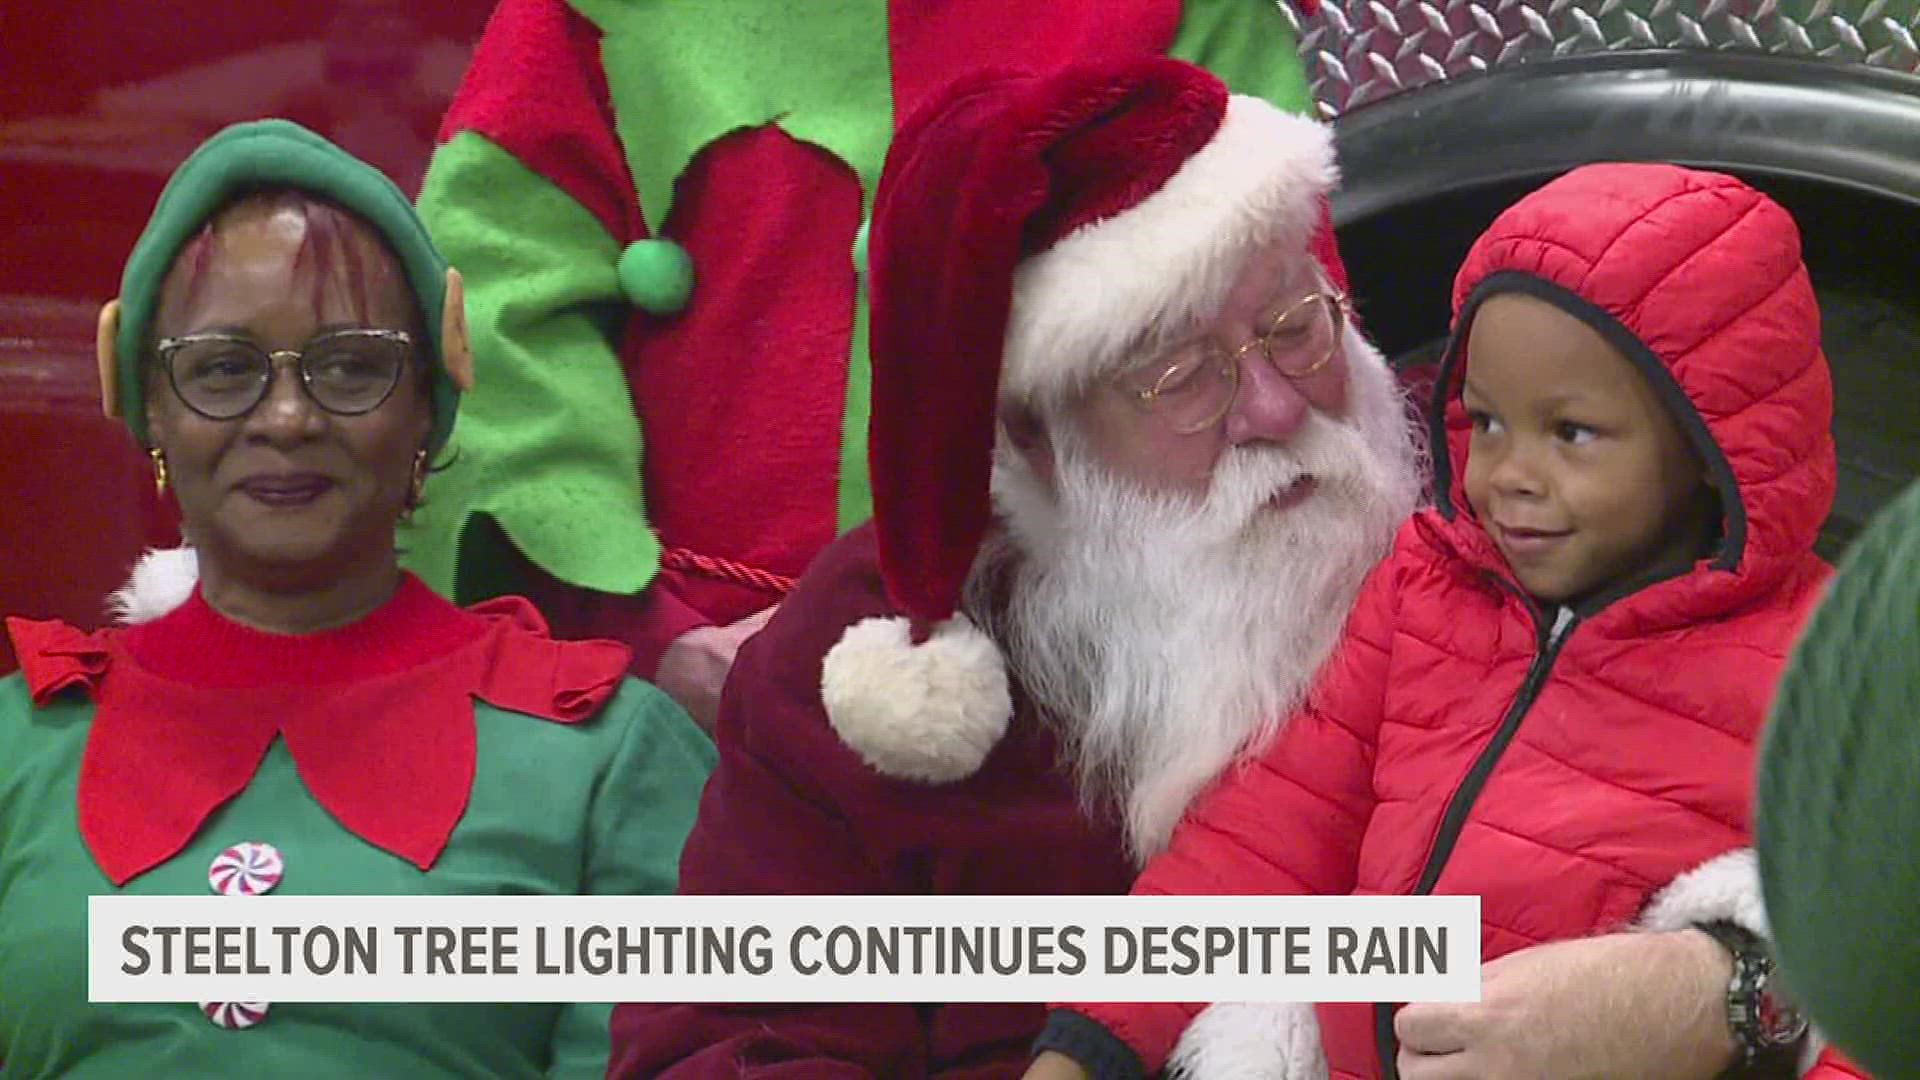 The rain didn't stop members of the Dauphin County community to gather at the municipal building in Steelton for the annual tree lighting.